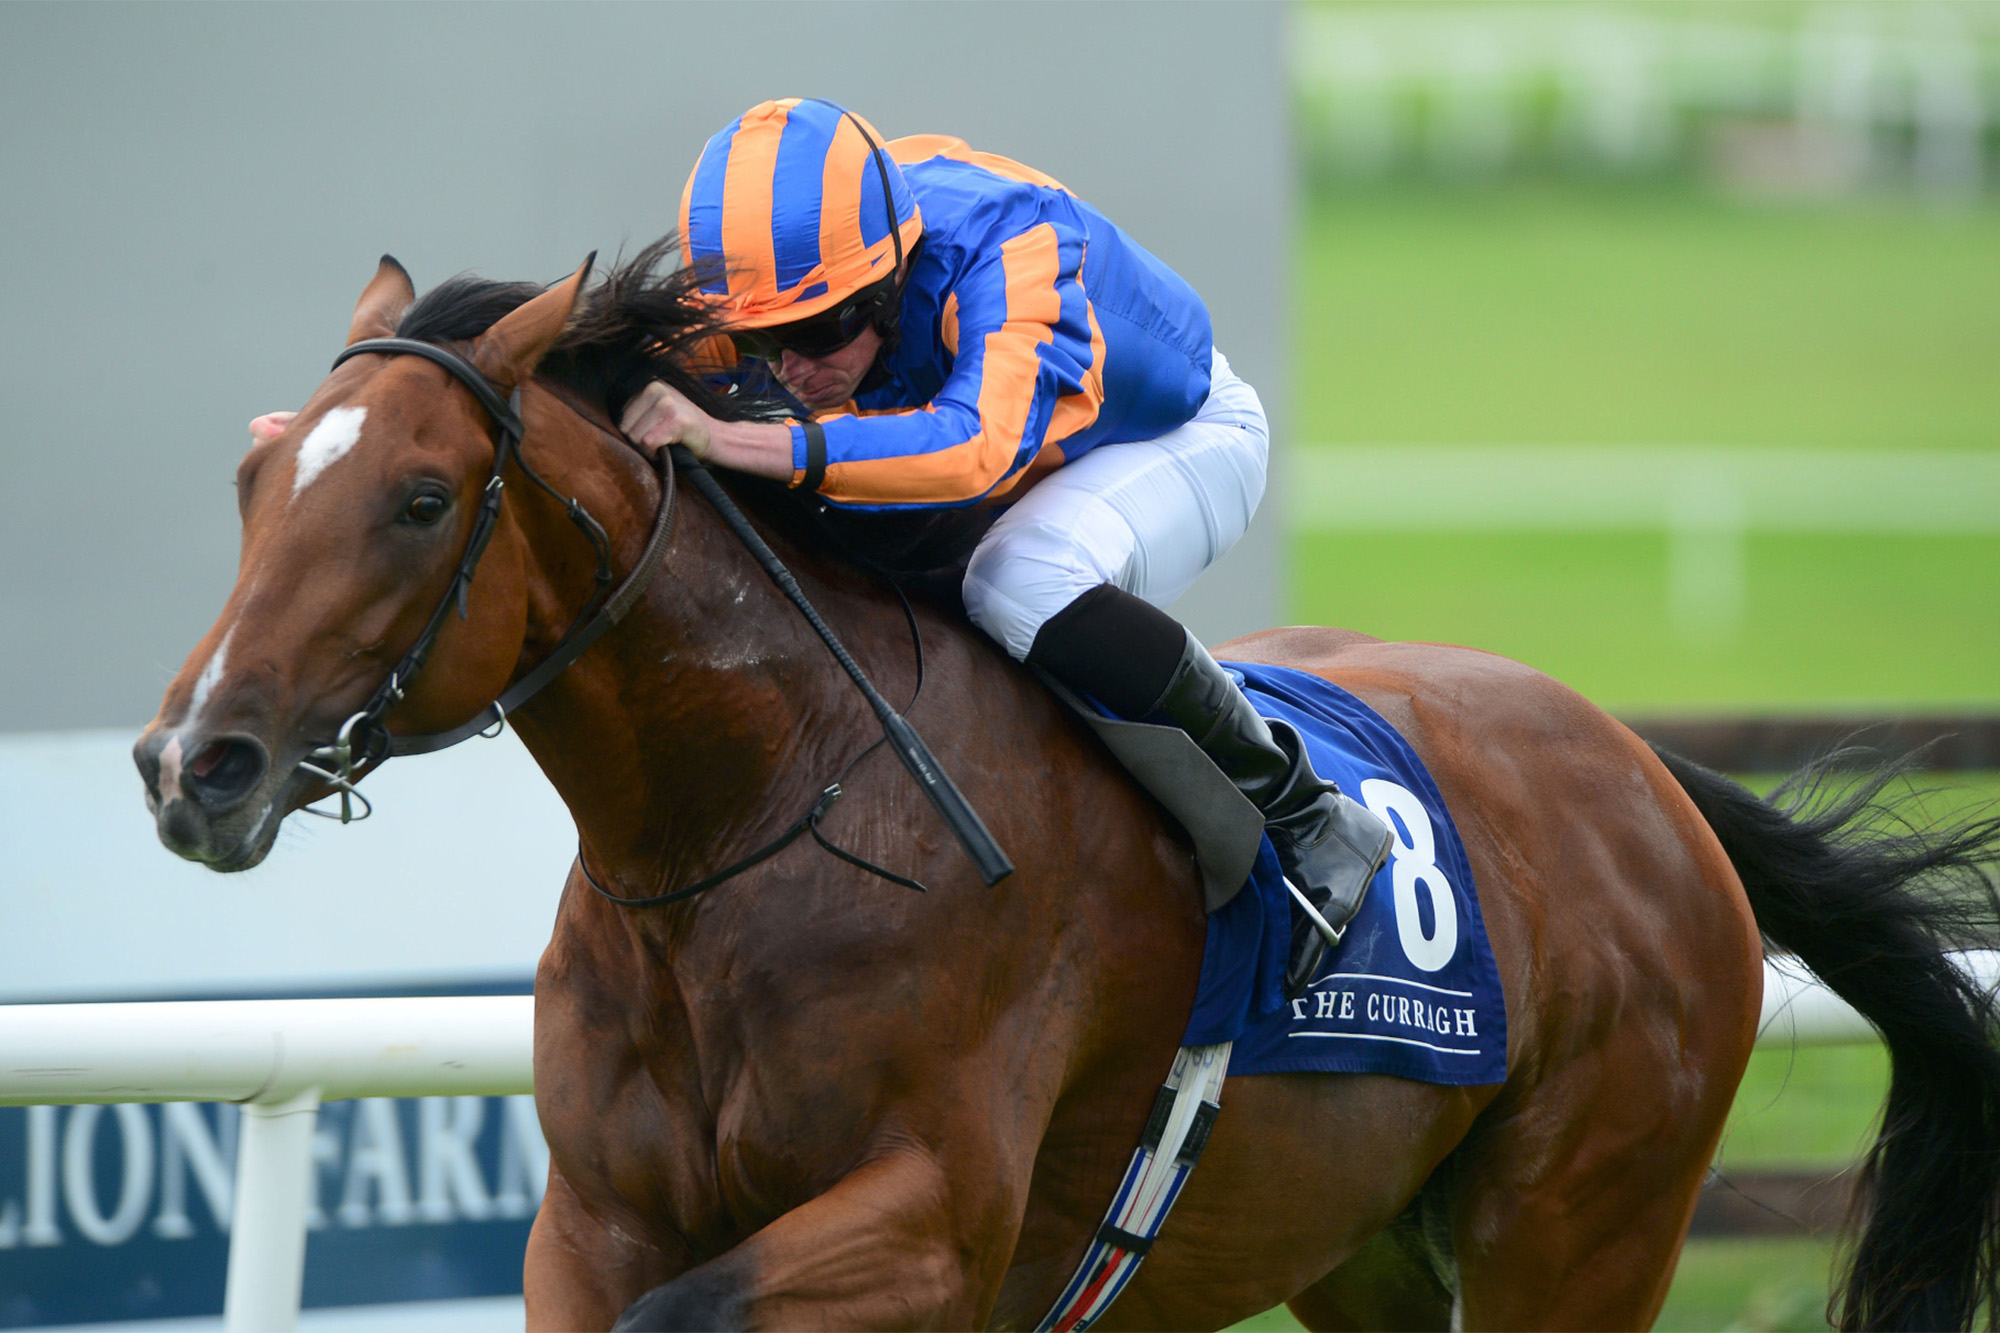 Mogul – IRE : G1 Grand Prix de Paris winner ahead of subsequent Arc second In Swoop; tough O’Brien-trained stayer.